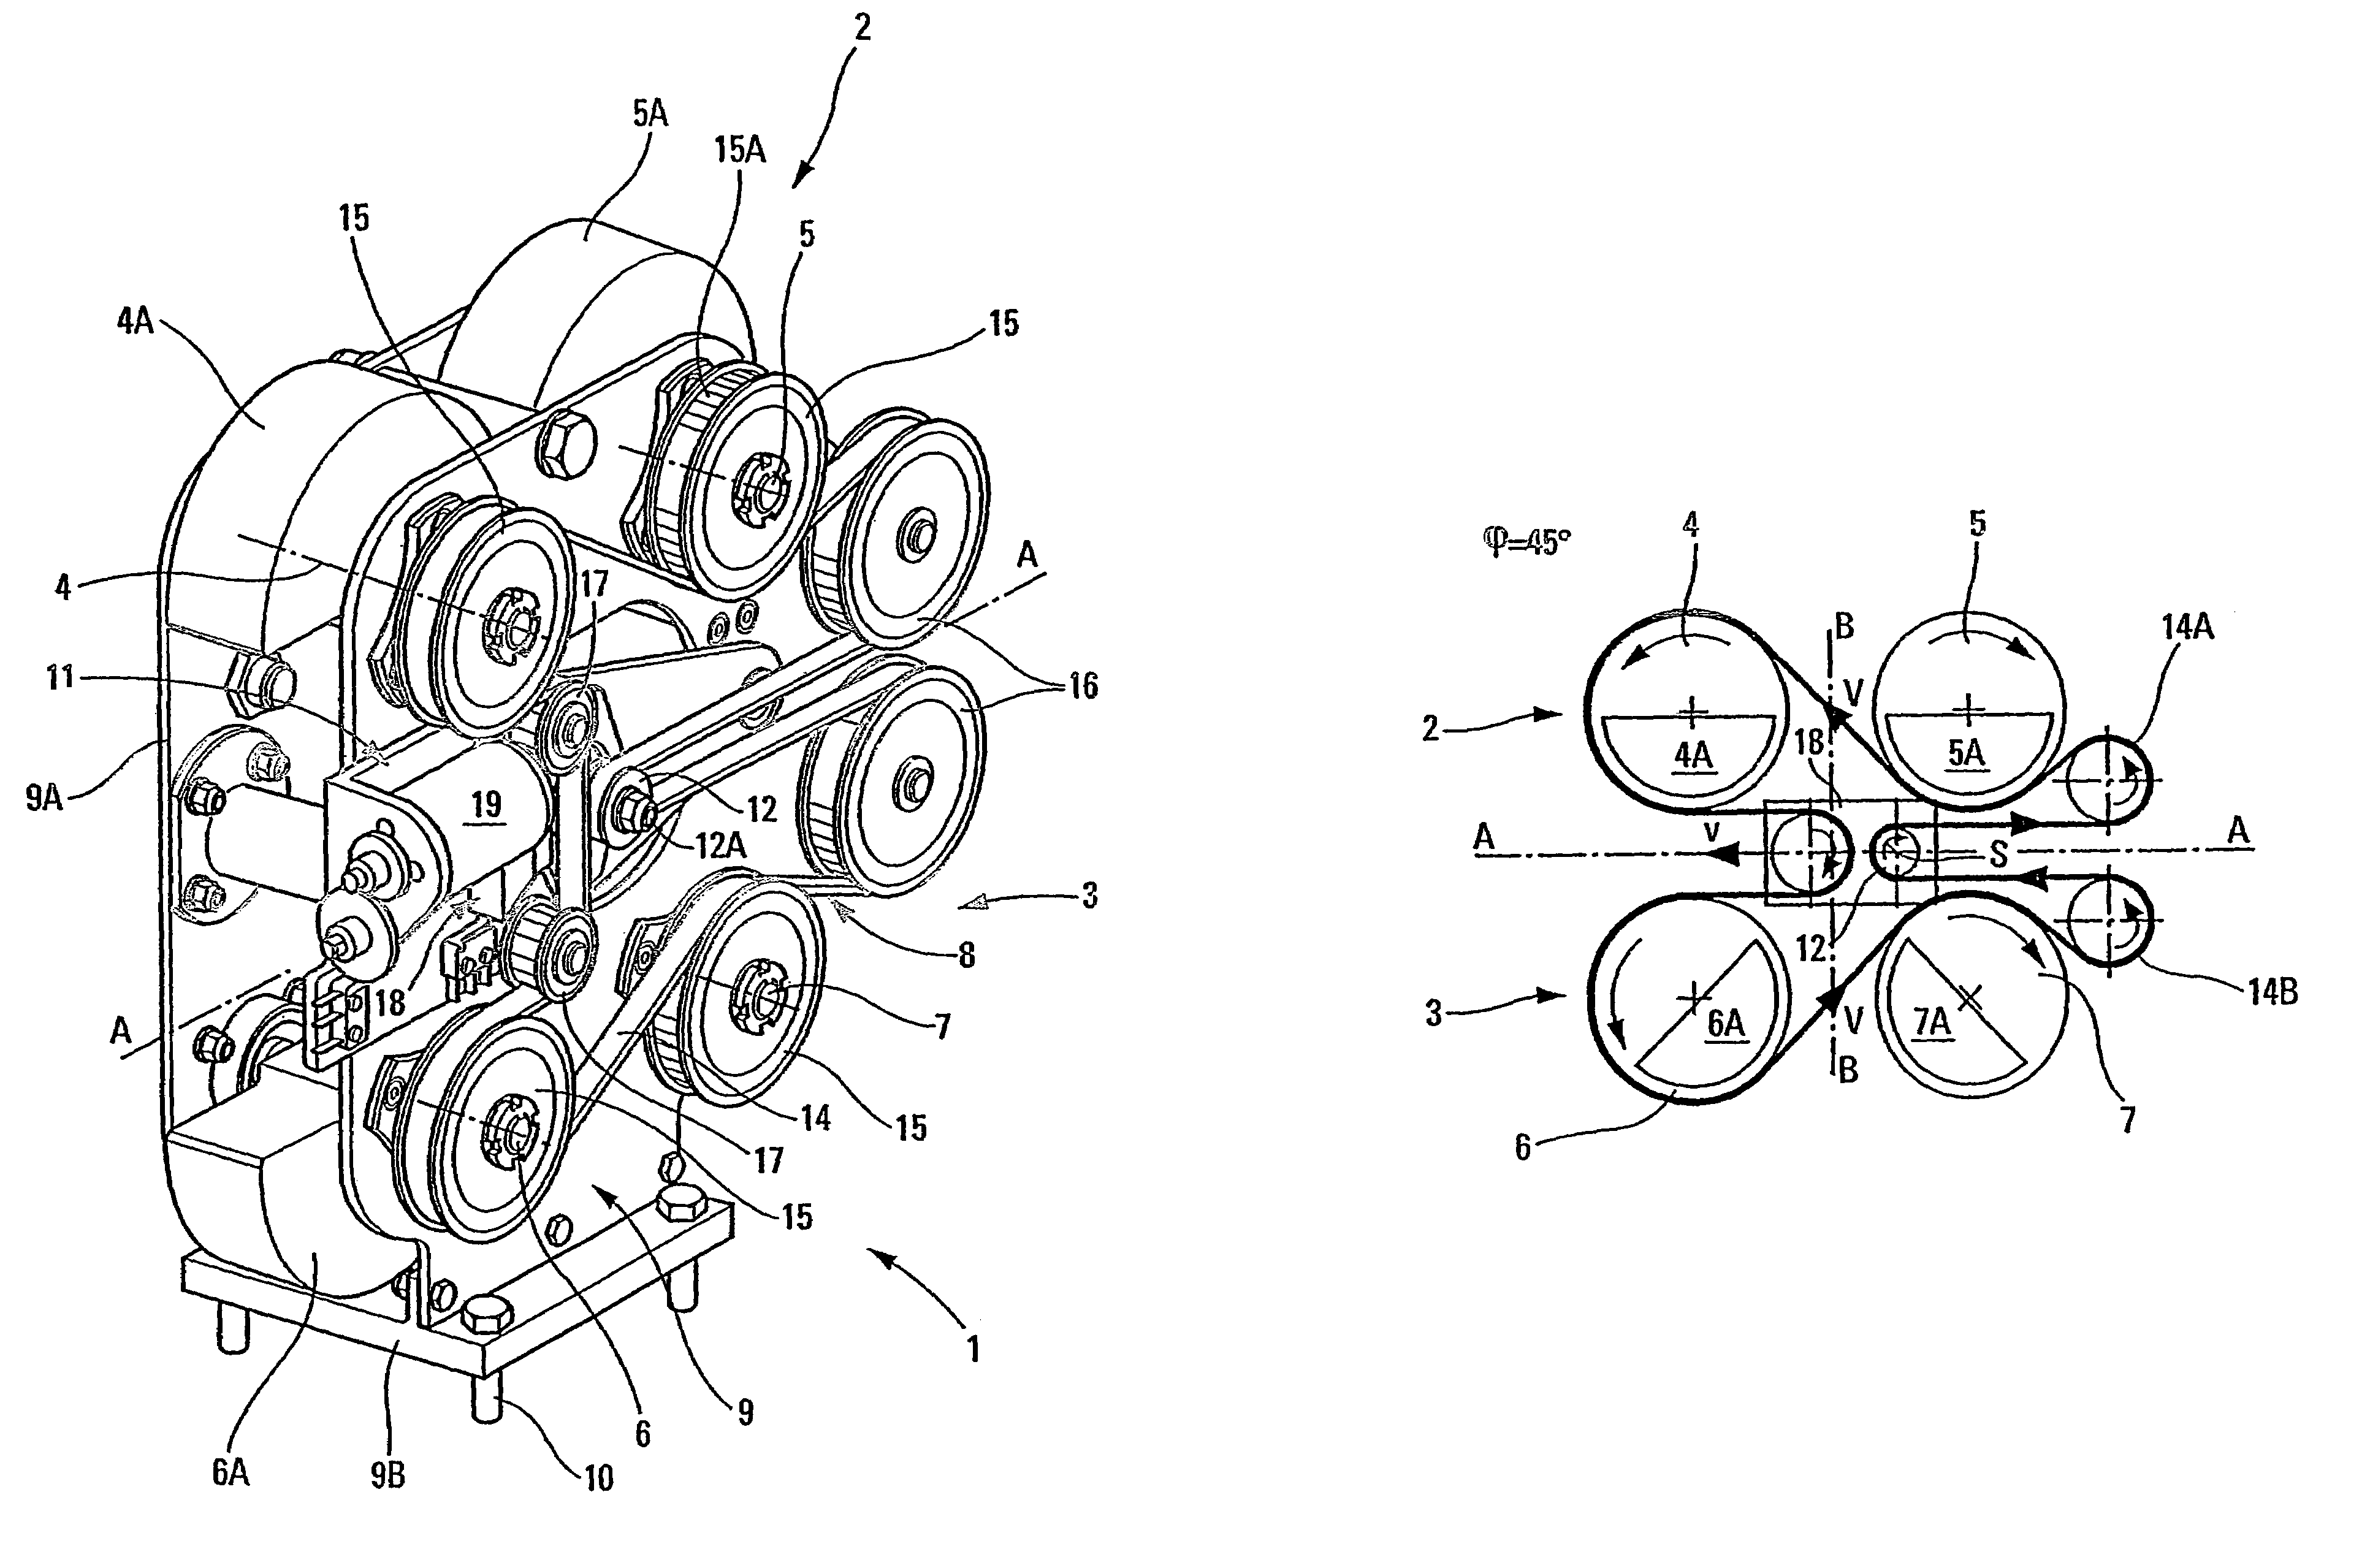 Anti-vibratory device with rotary compensation weights